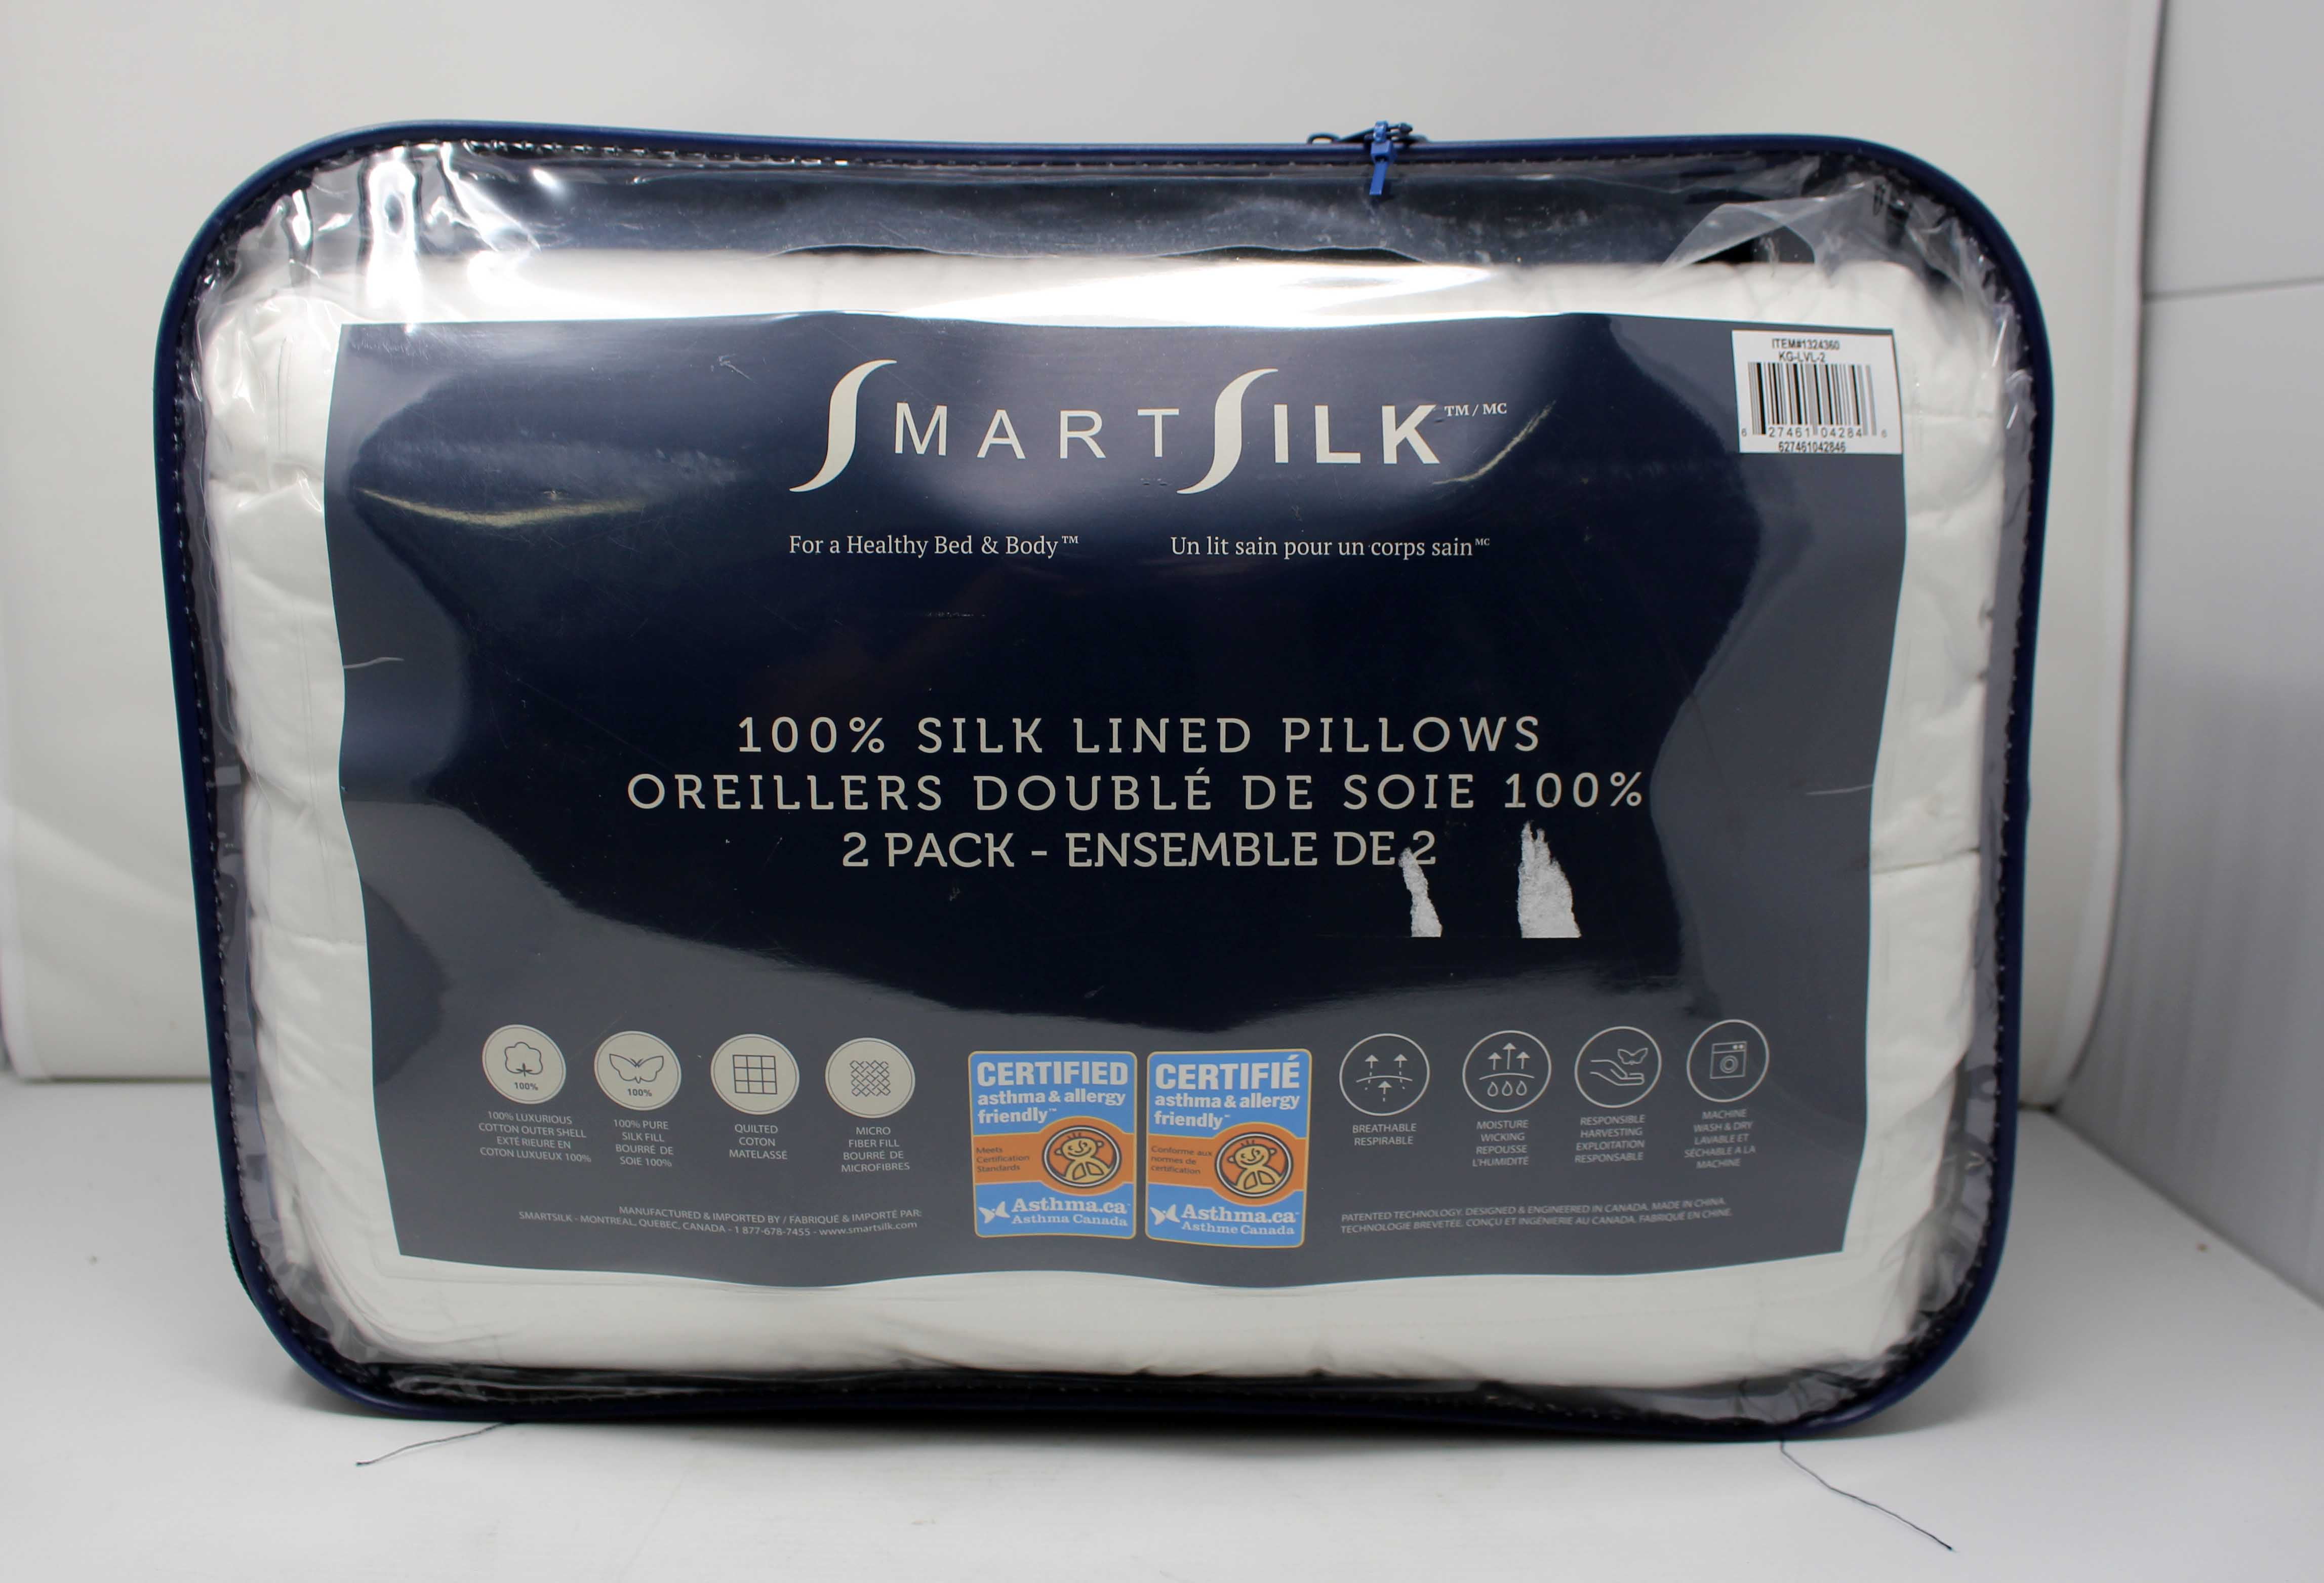 NEW! Smart Silk Luxury Bed Collection 100% Silk Lined Pillow STANDARD Level 3 